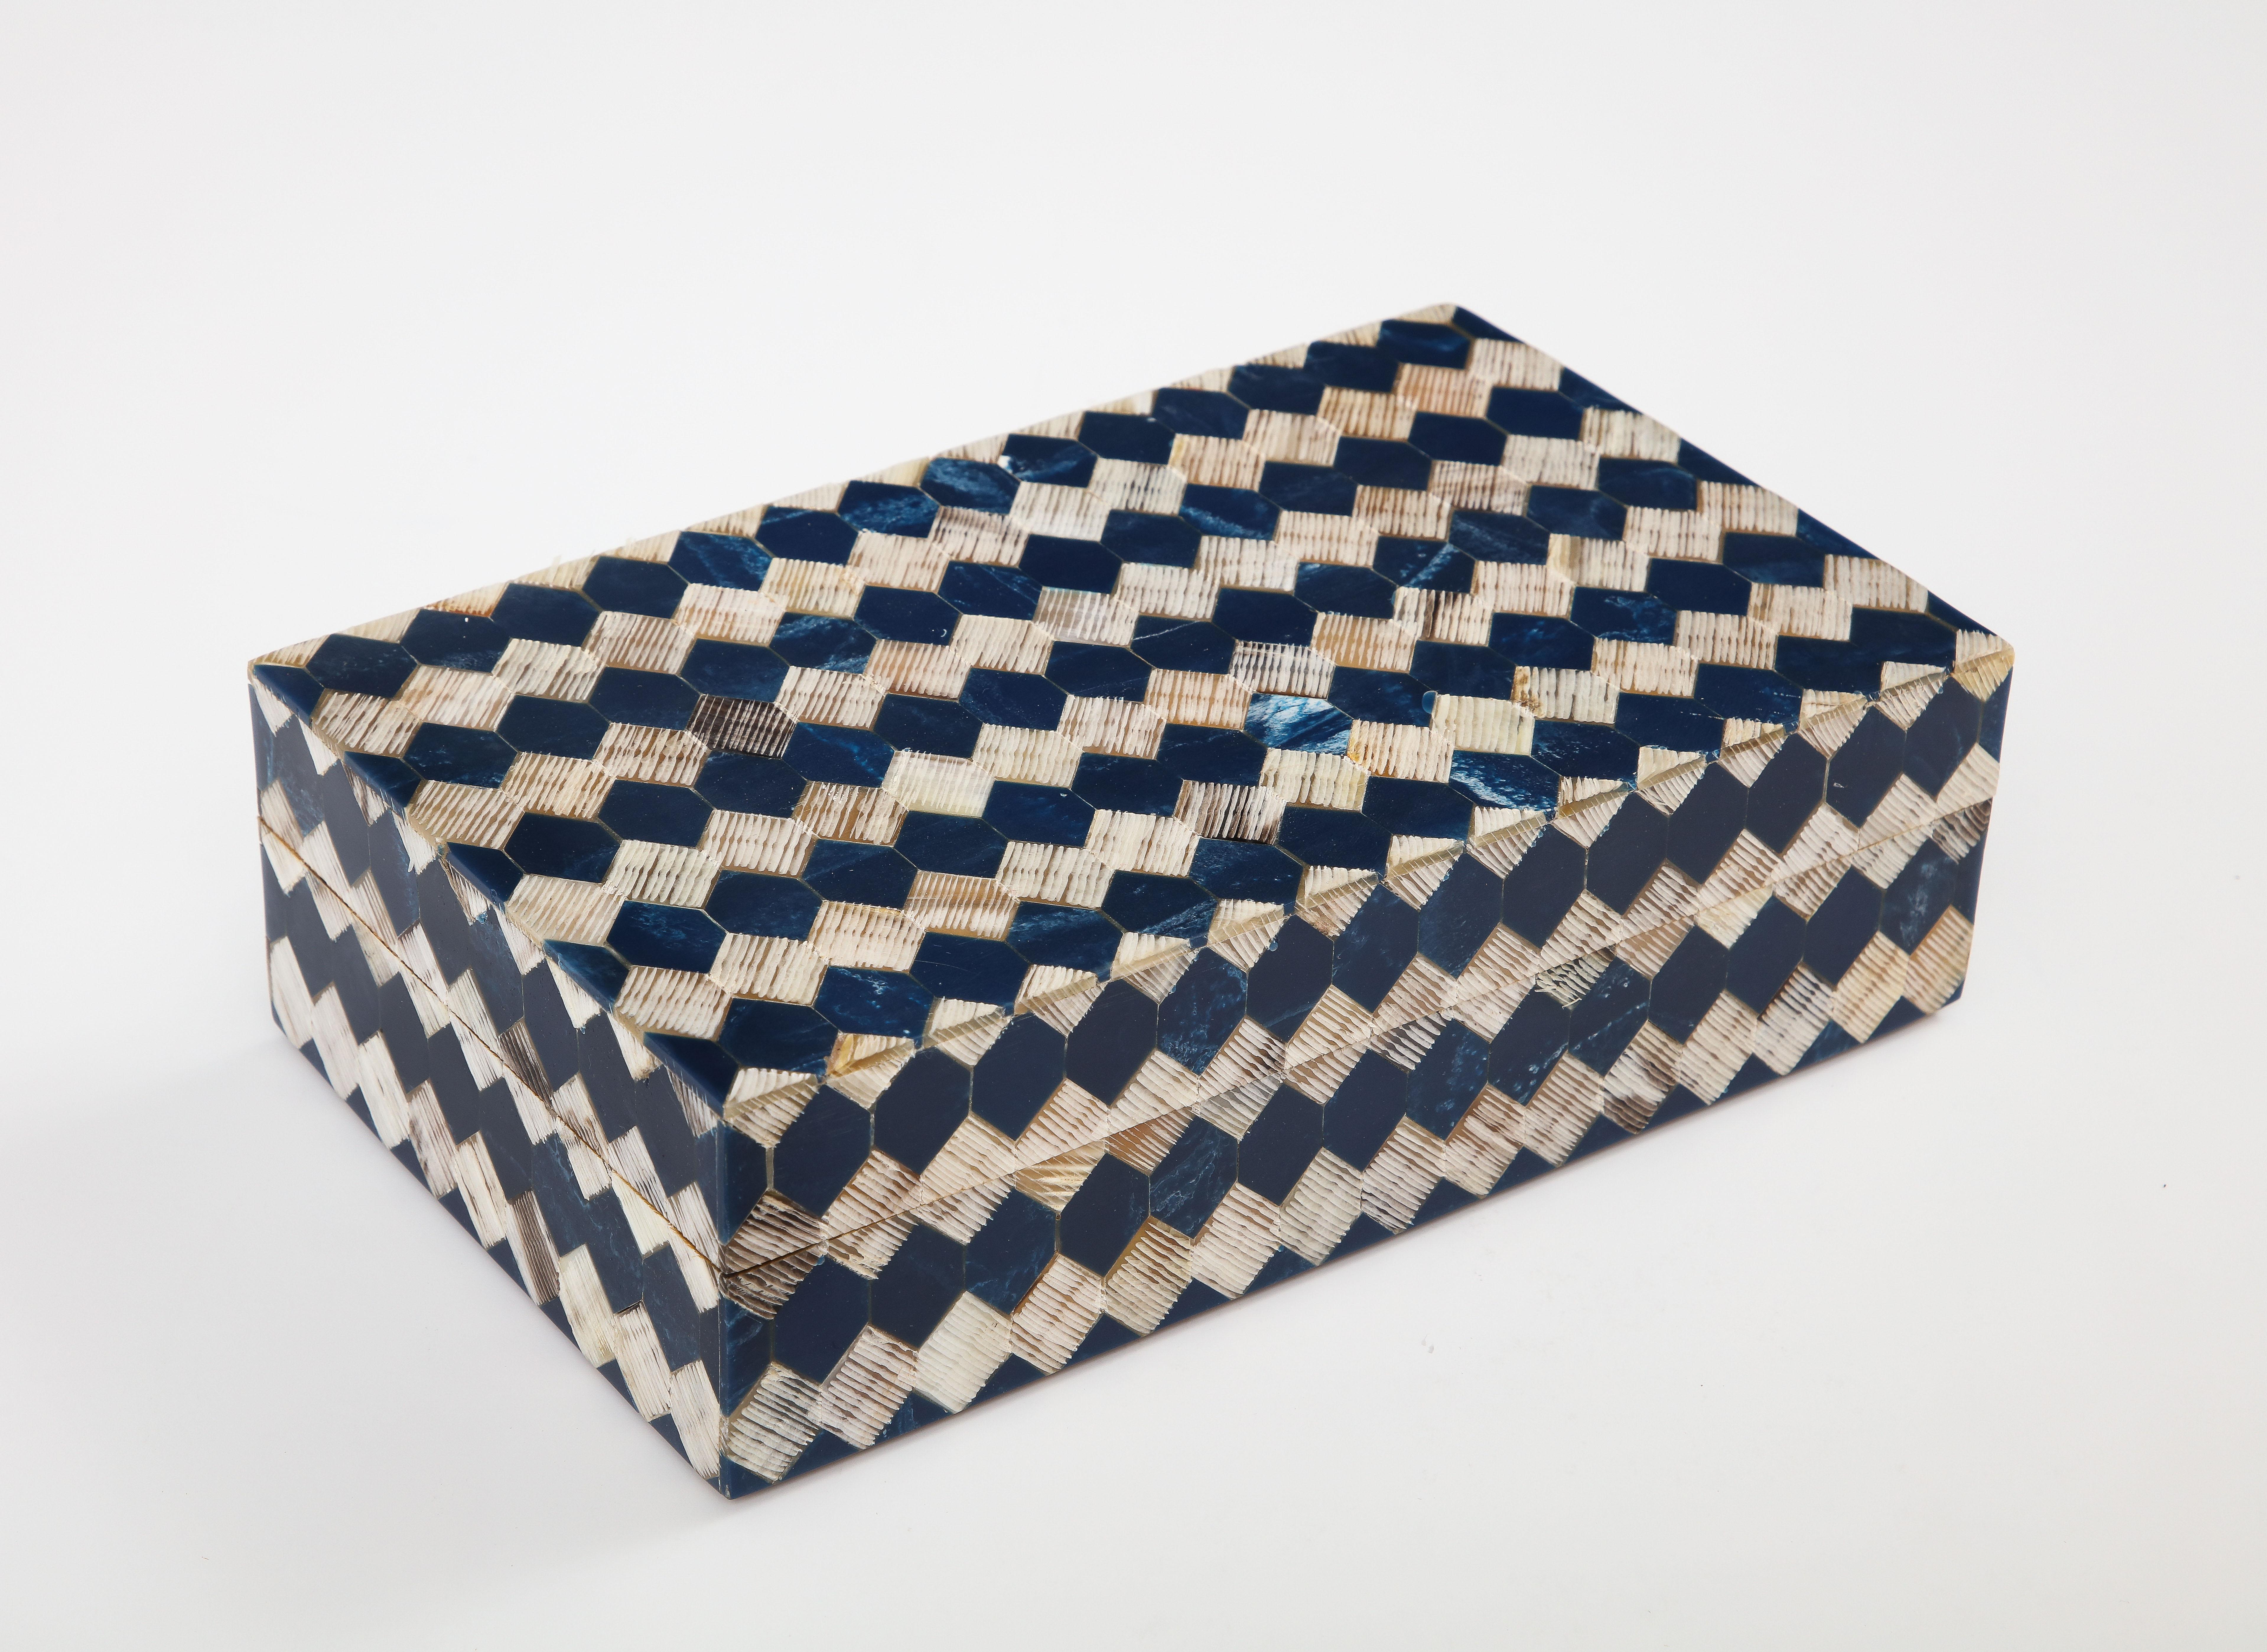 Decorative keepsake/jewelry box clad in hand incised natural horn and ink blue dyed bone tiles hand set on a wood structure. A great addition to any desk or coffee table.